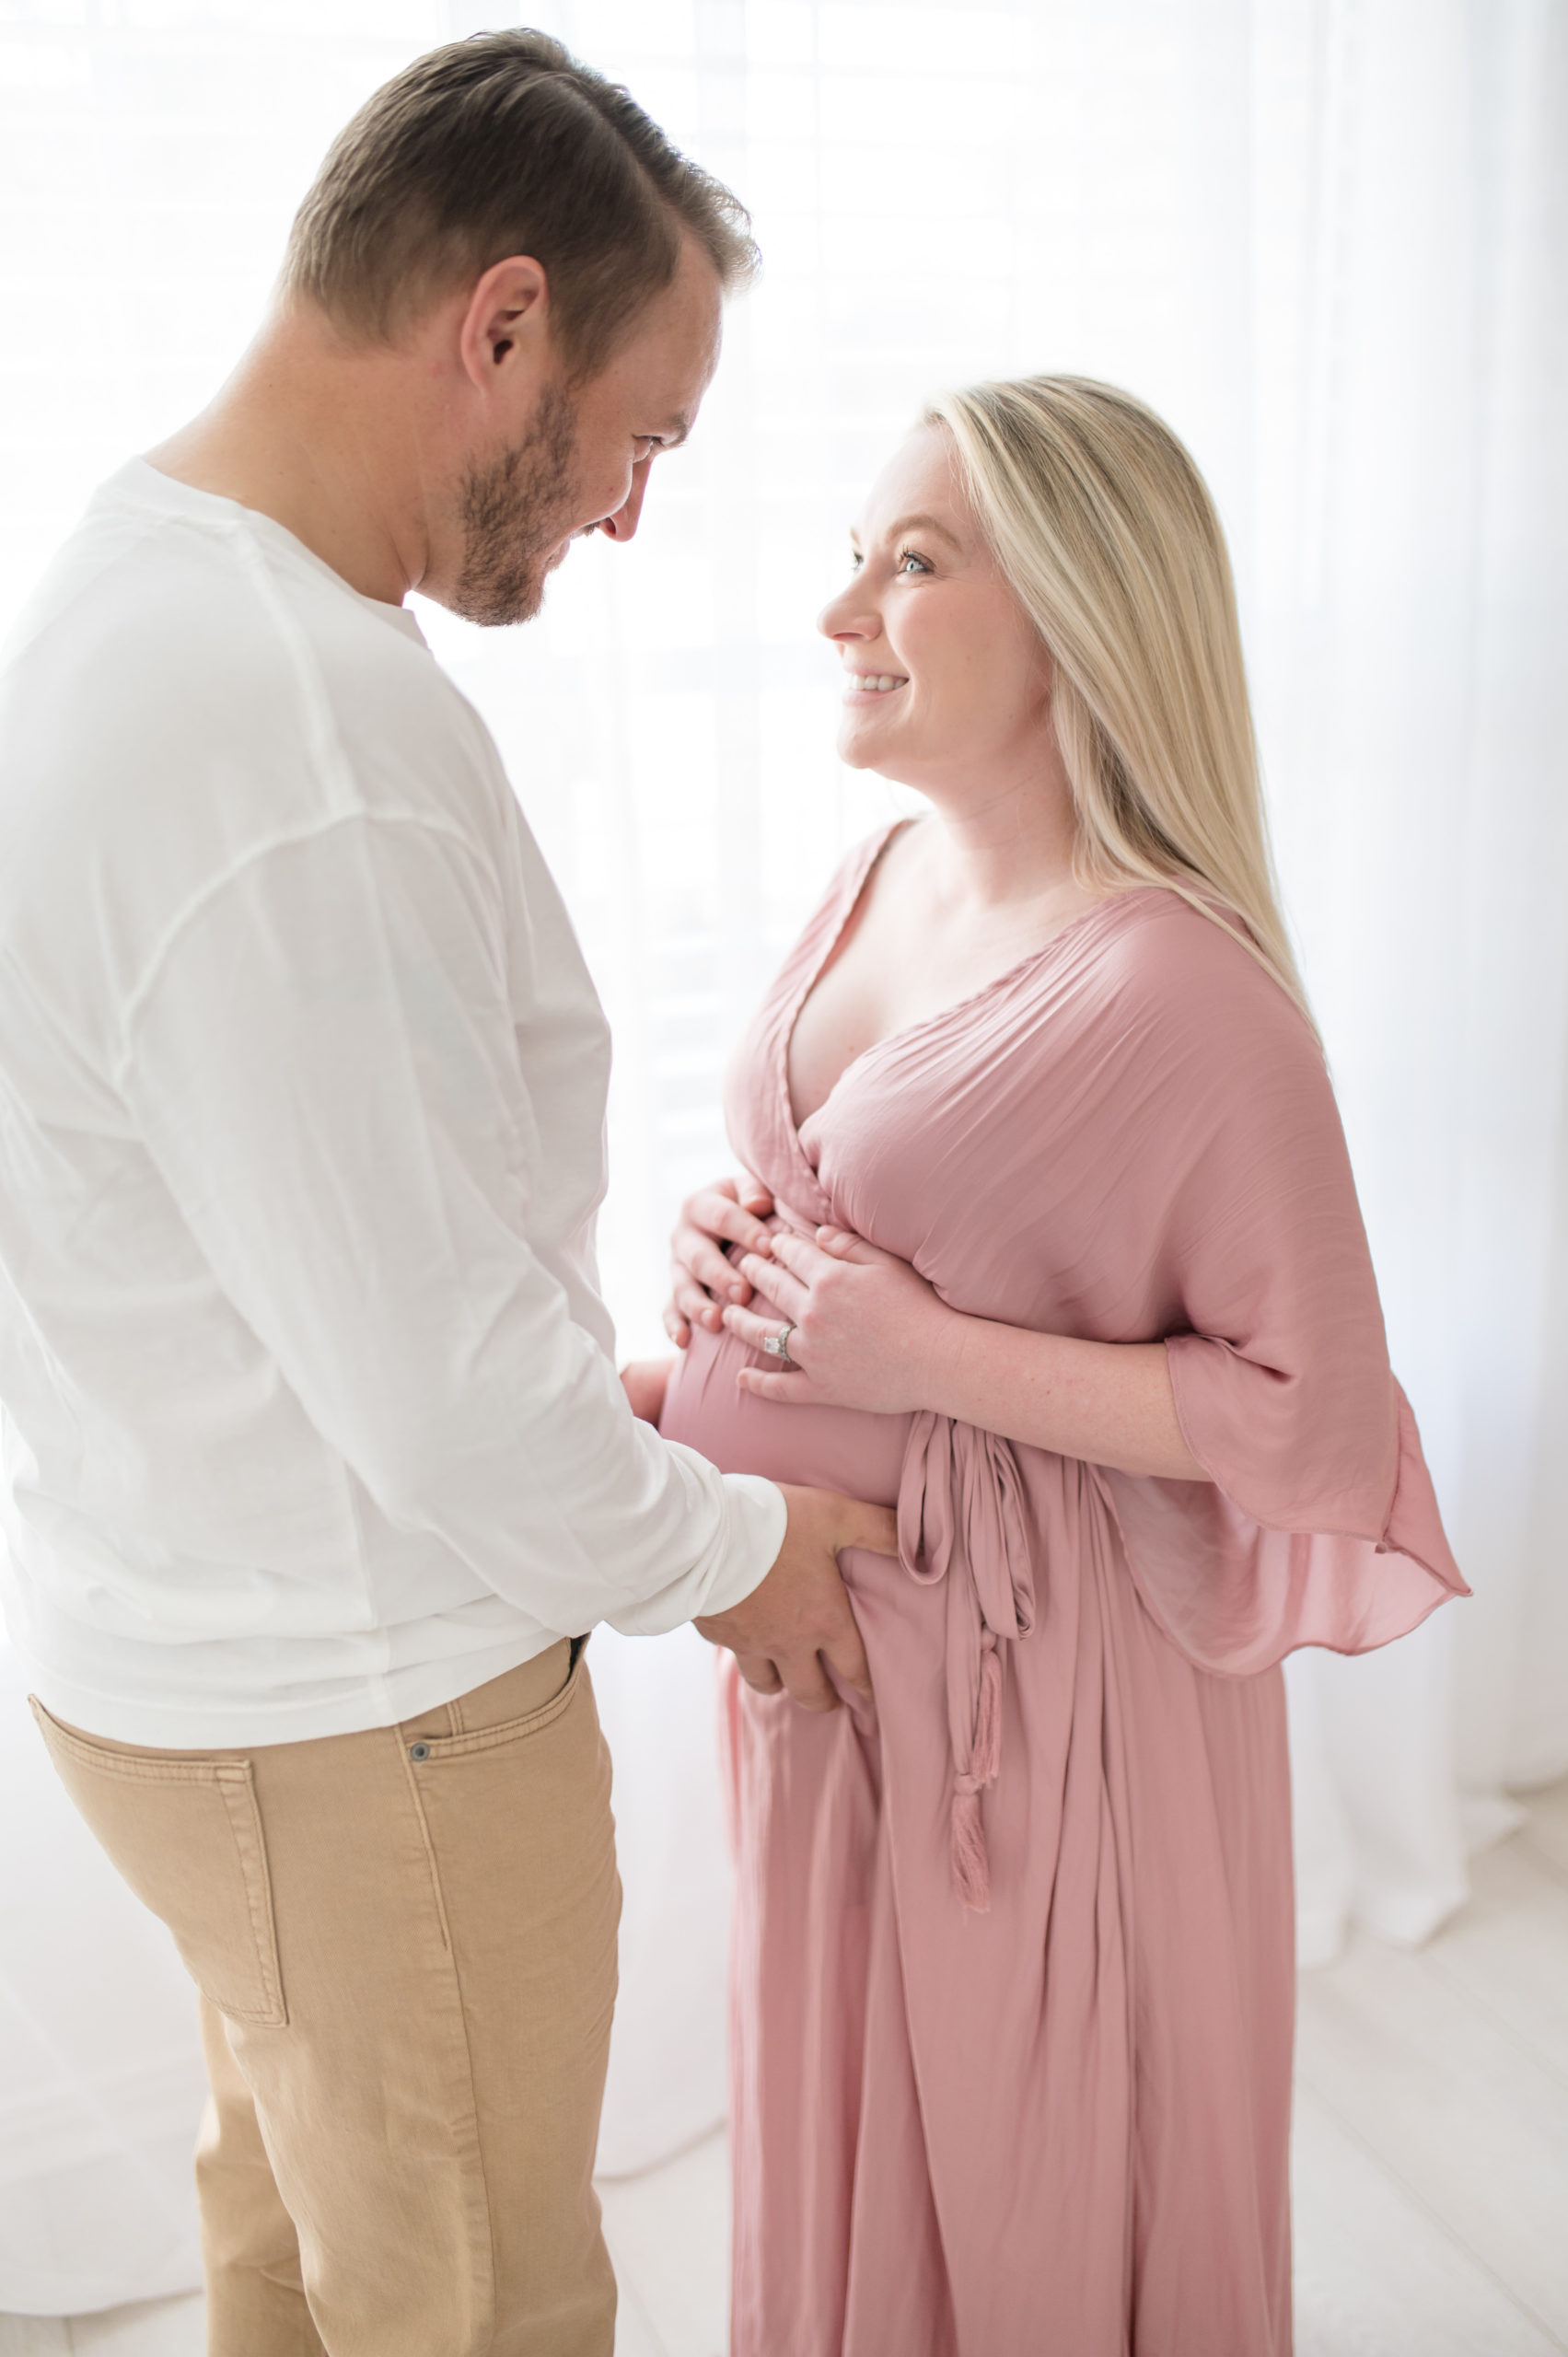 Pregnant mom and dad holding baby bump at an in studio in Dallas Texas photographed by Dallas newborn photographer, Lindsey Dutton Photography